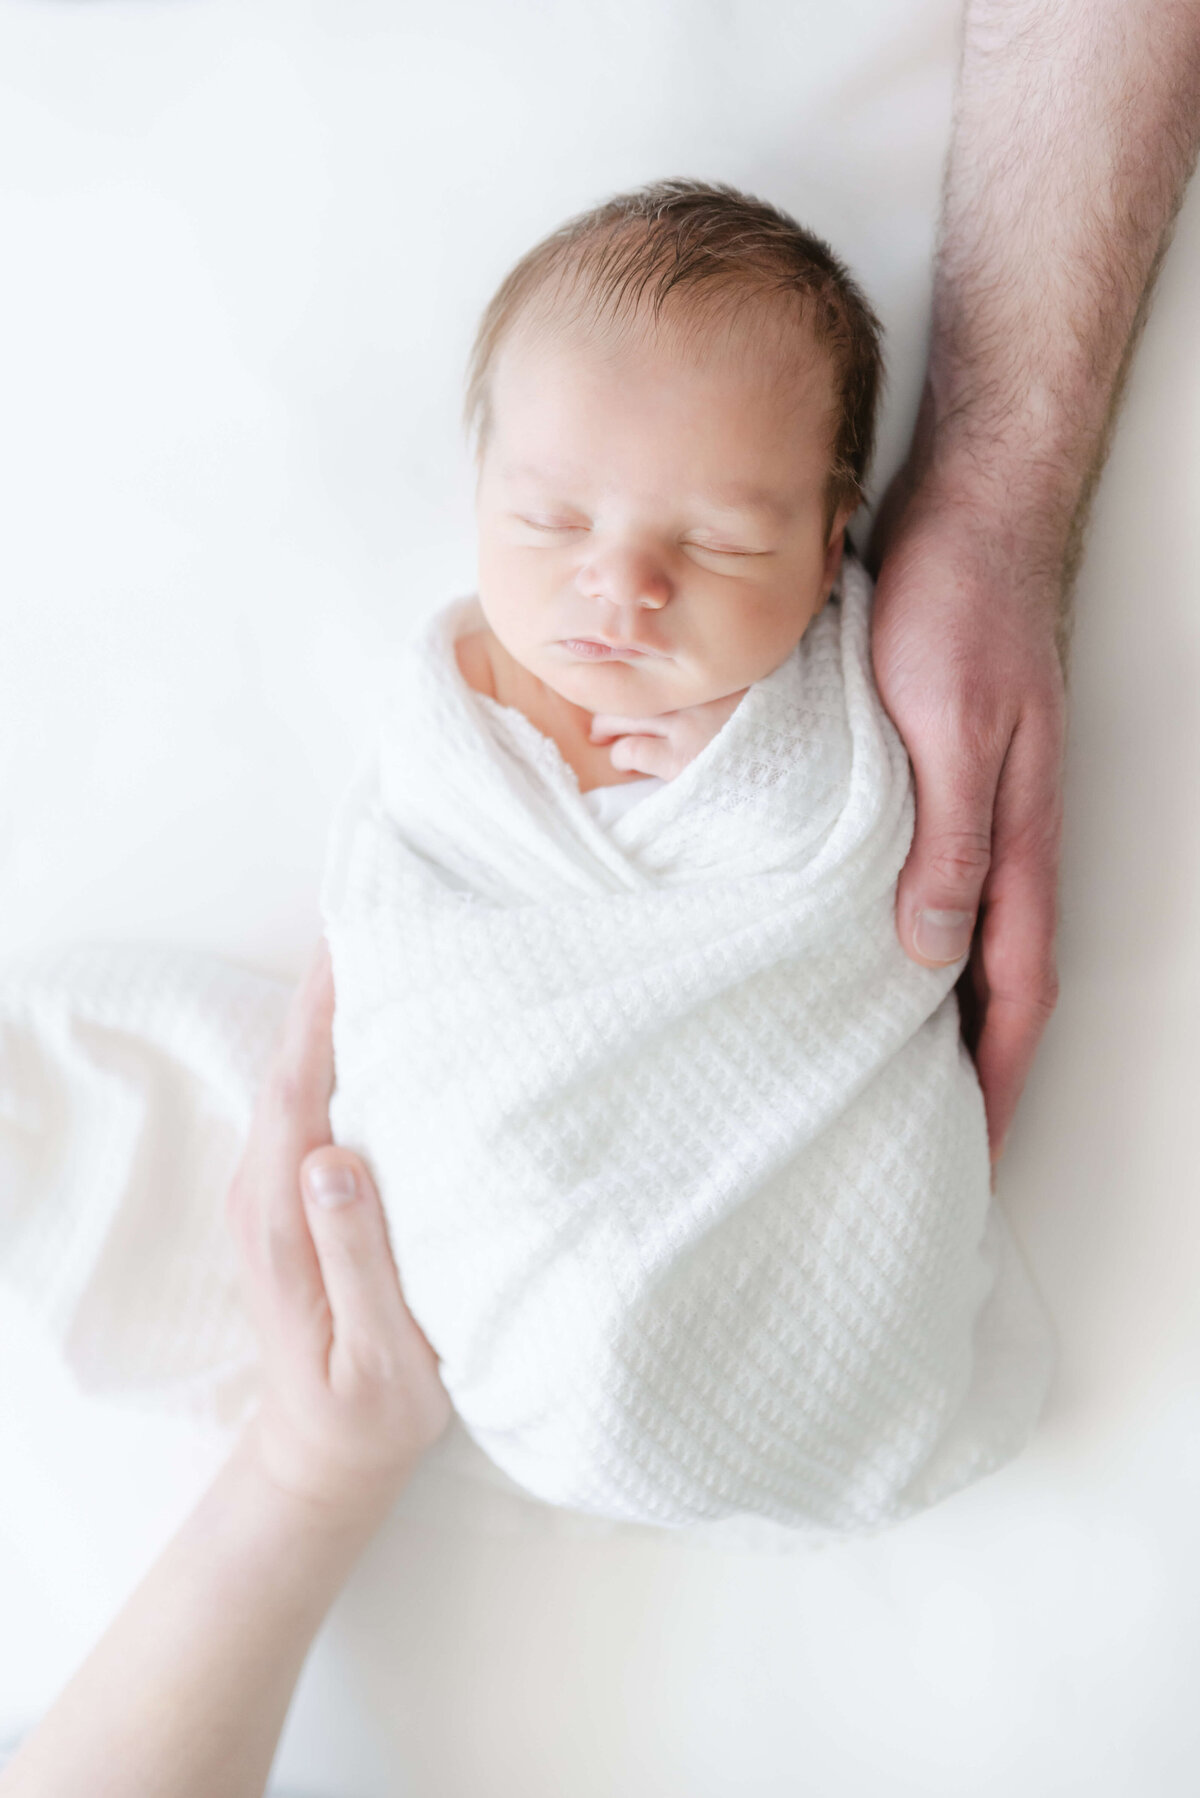 newborn baby boy on white background with mom and dad's hands